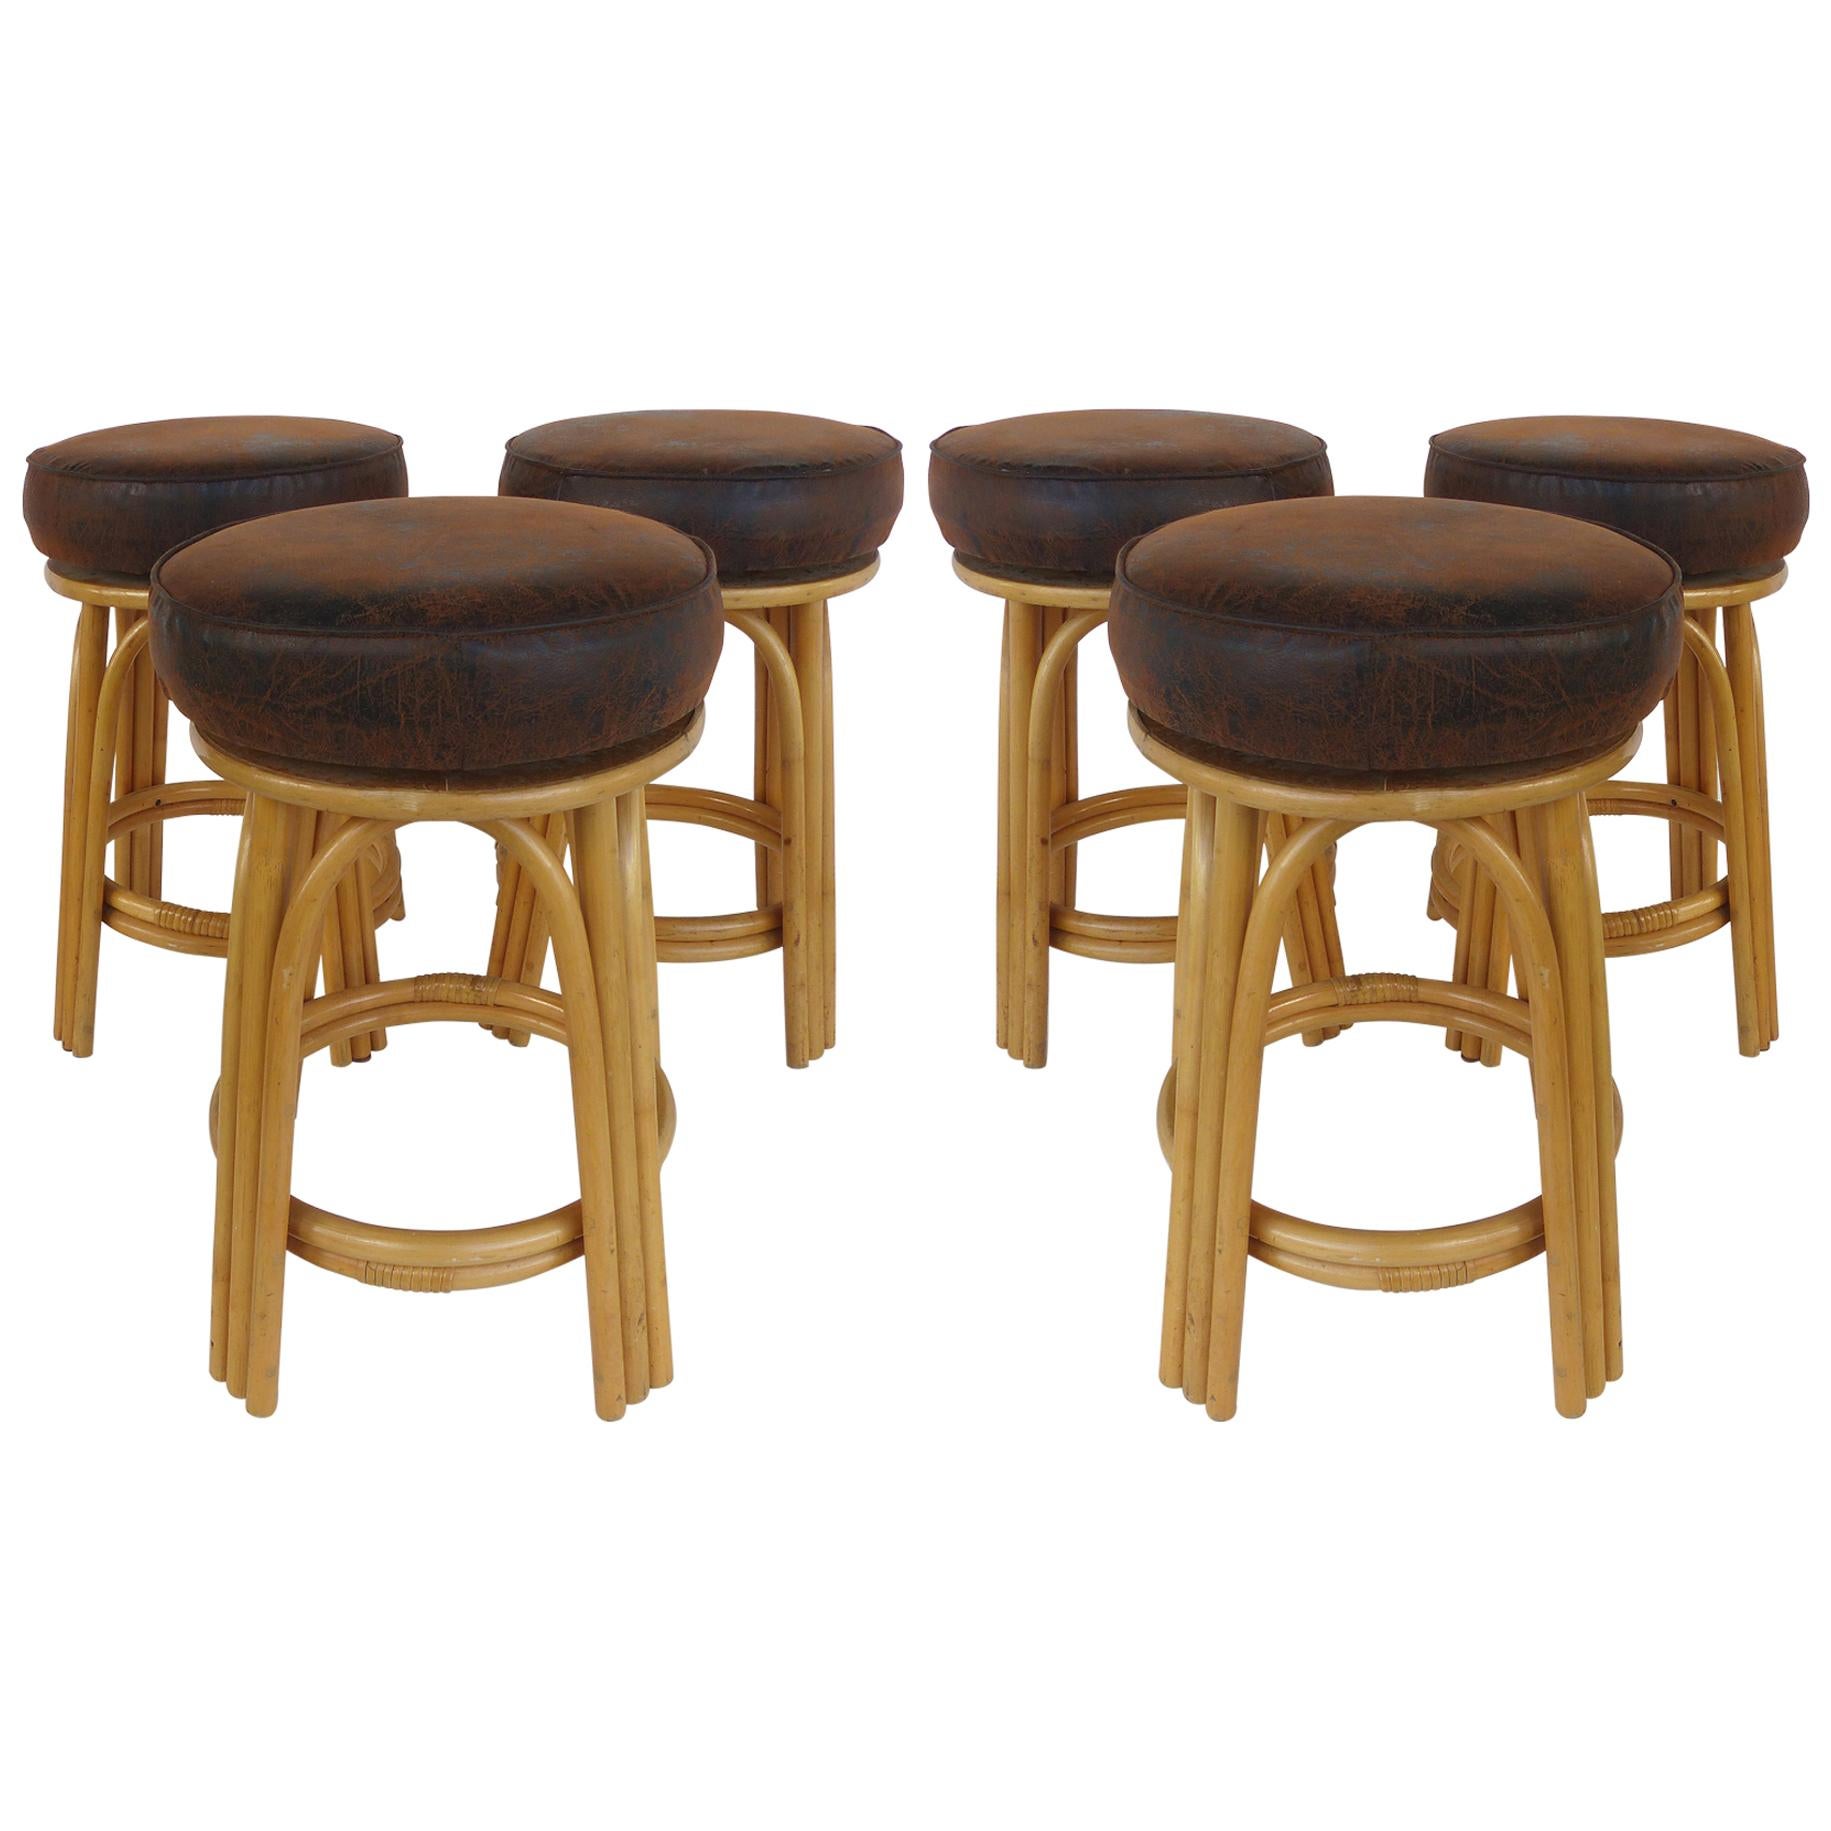 Clark Casual Furniture Rattan Counter Stools, three available